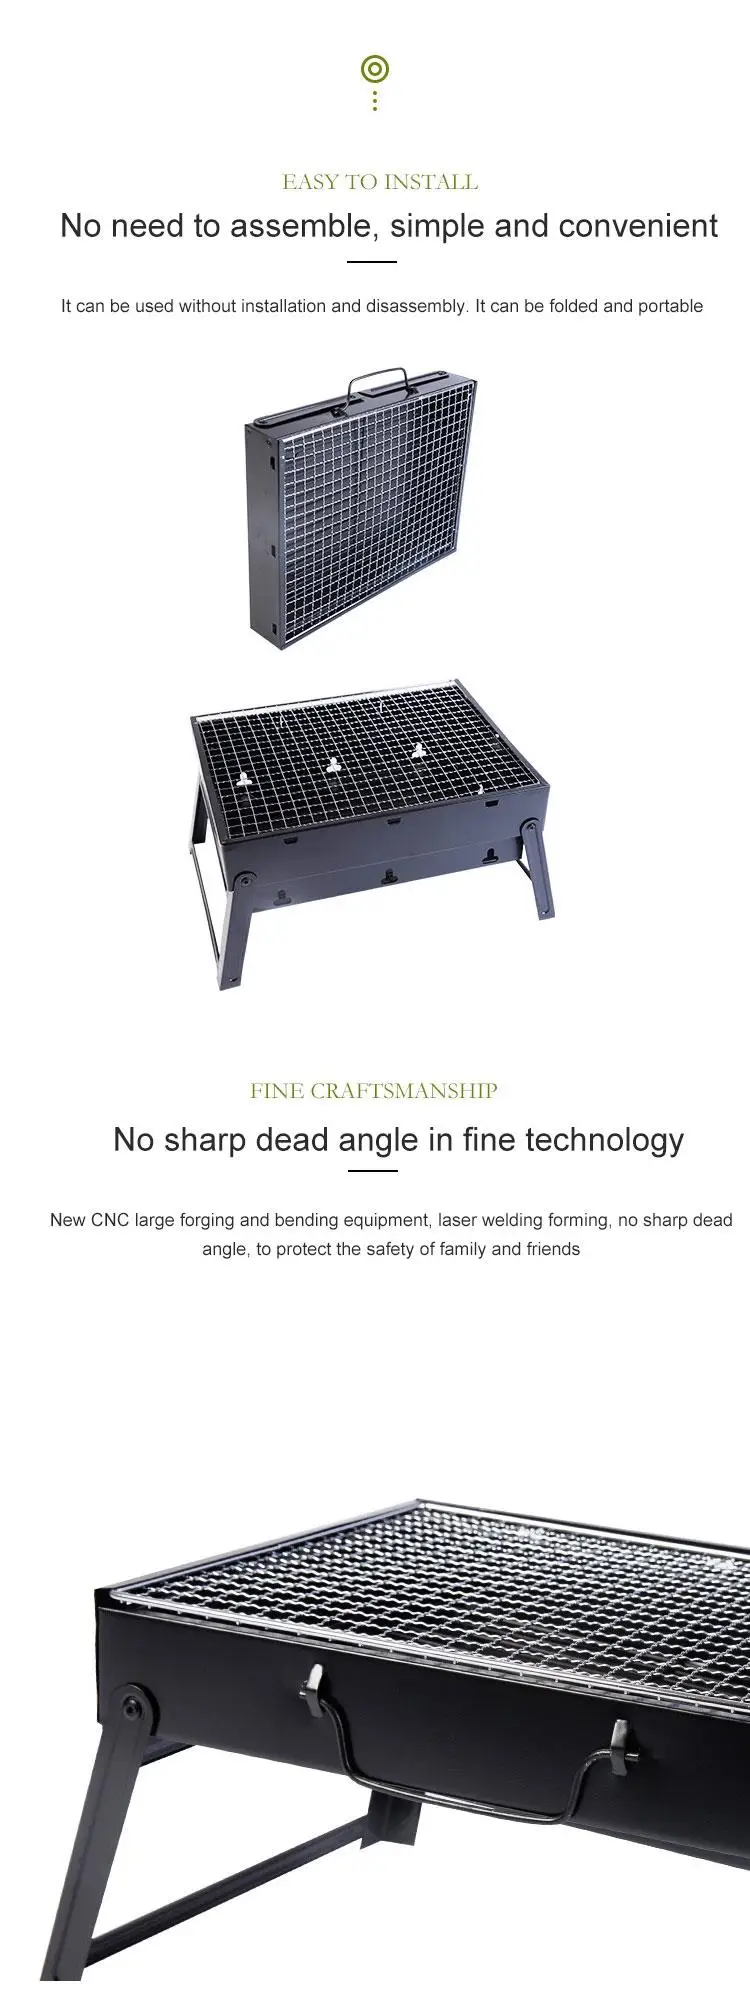 Made in china bbq charcoal grill for outdoor for 5 people foldable charcoal bbq grill